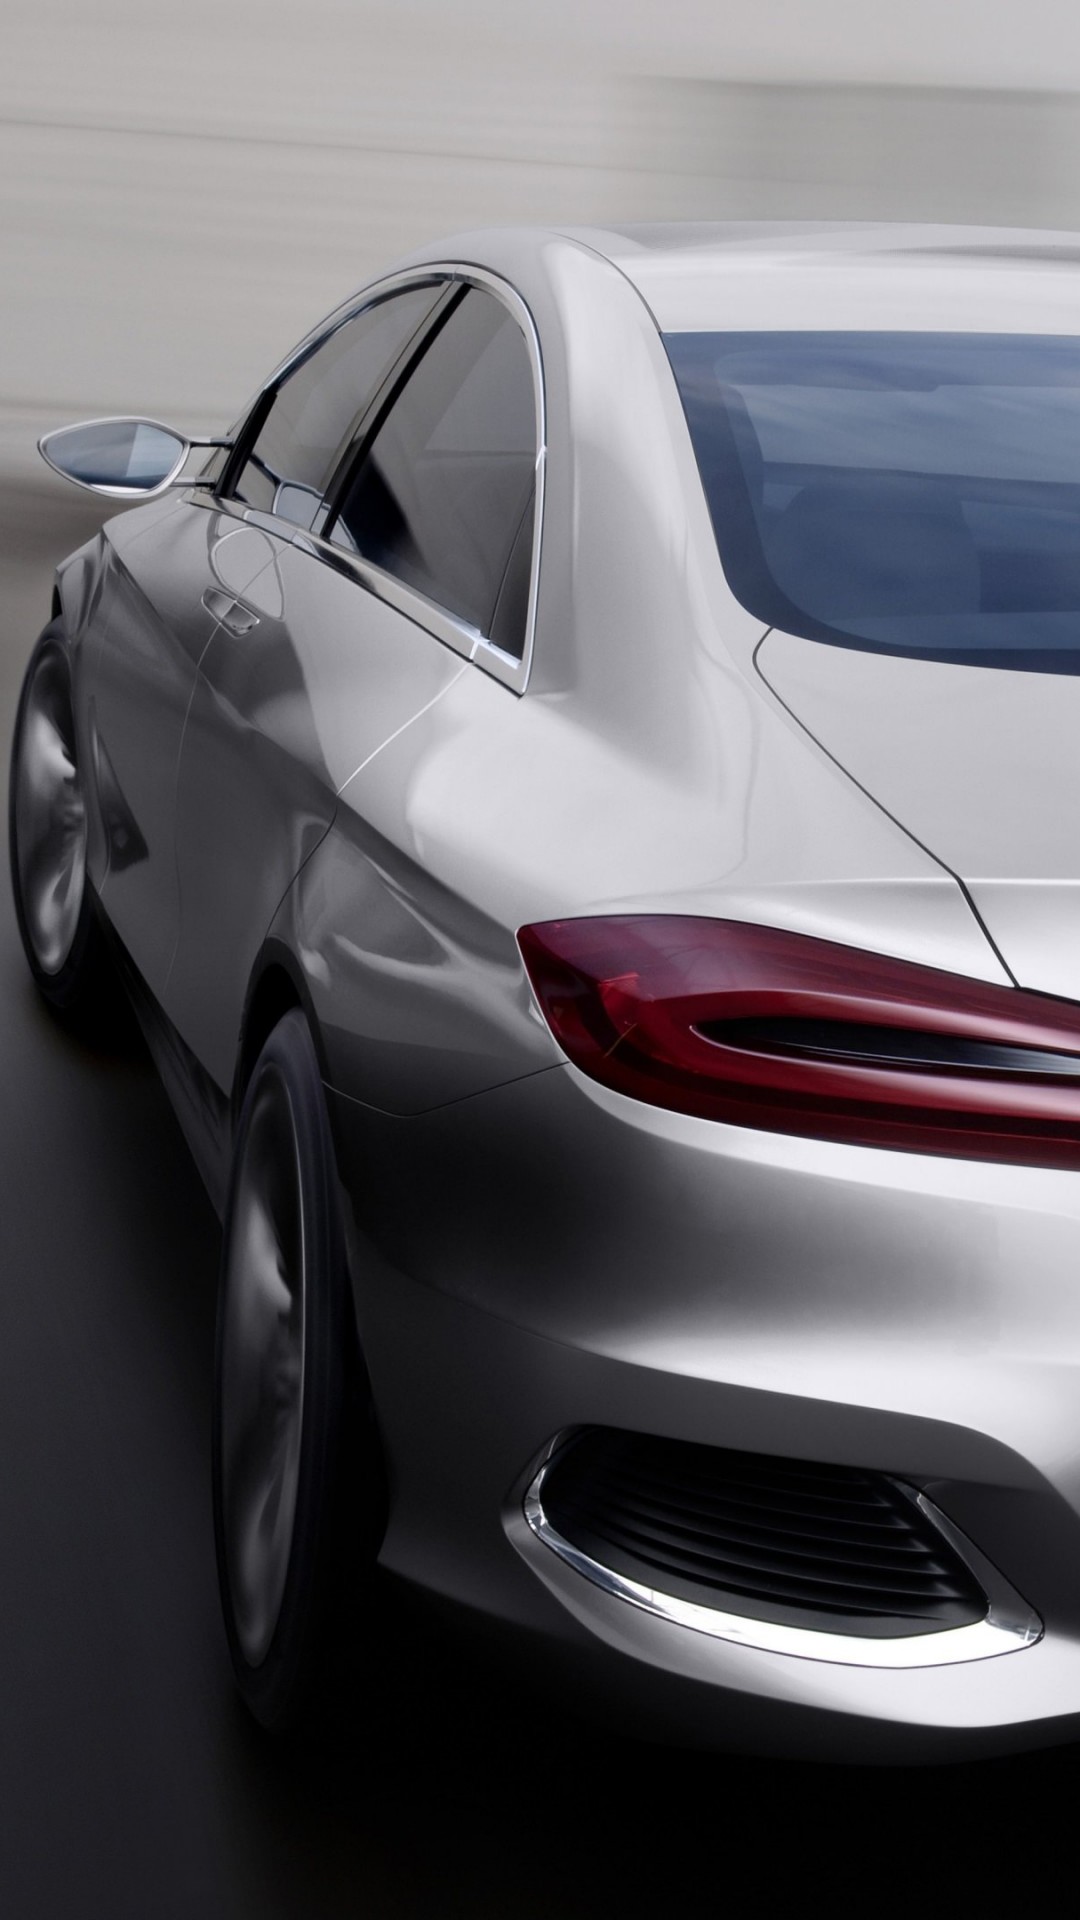 Mercedes Benz F800 Concept Rear View Wallpaper for SONY Xperia Z3